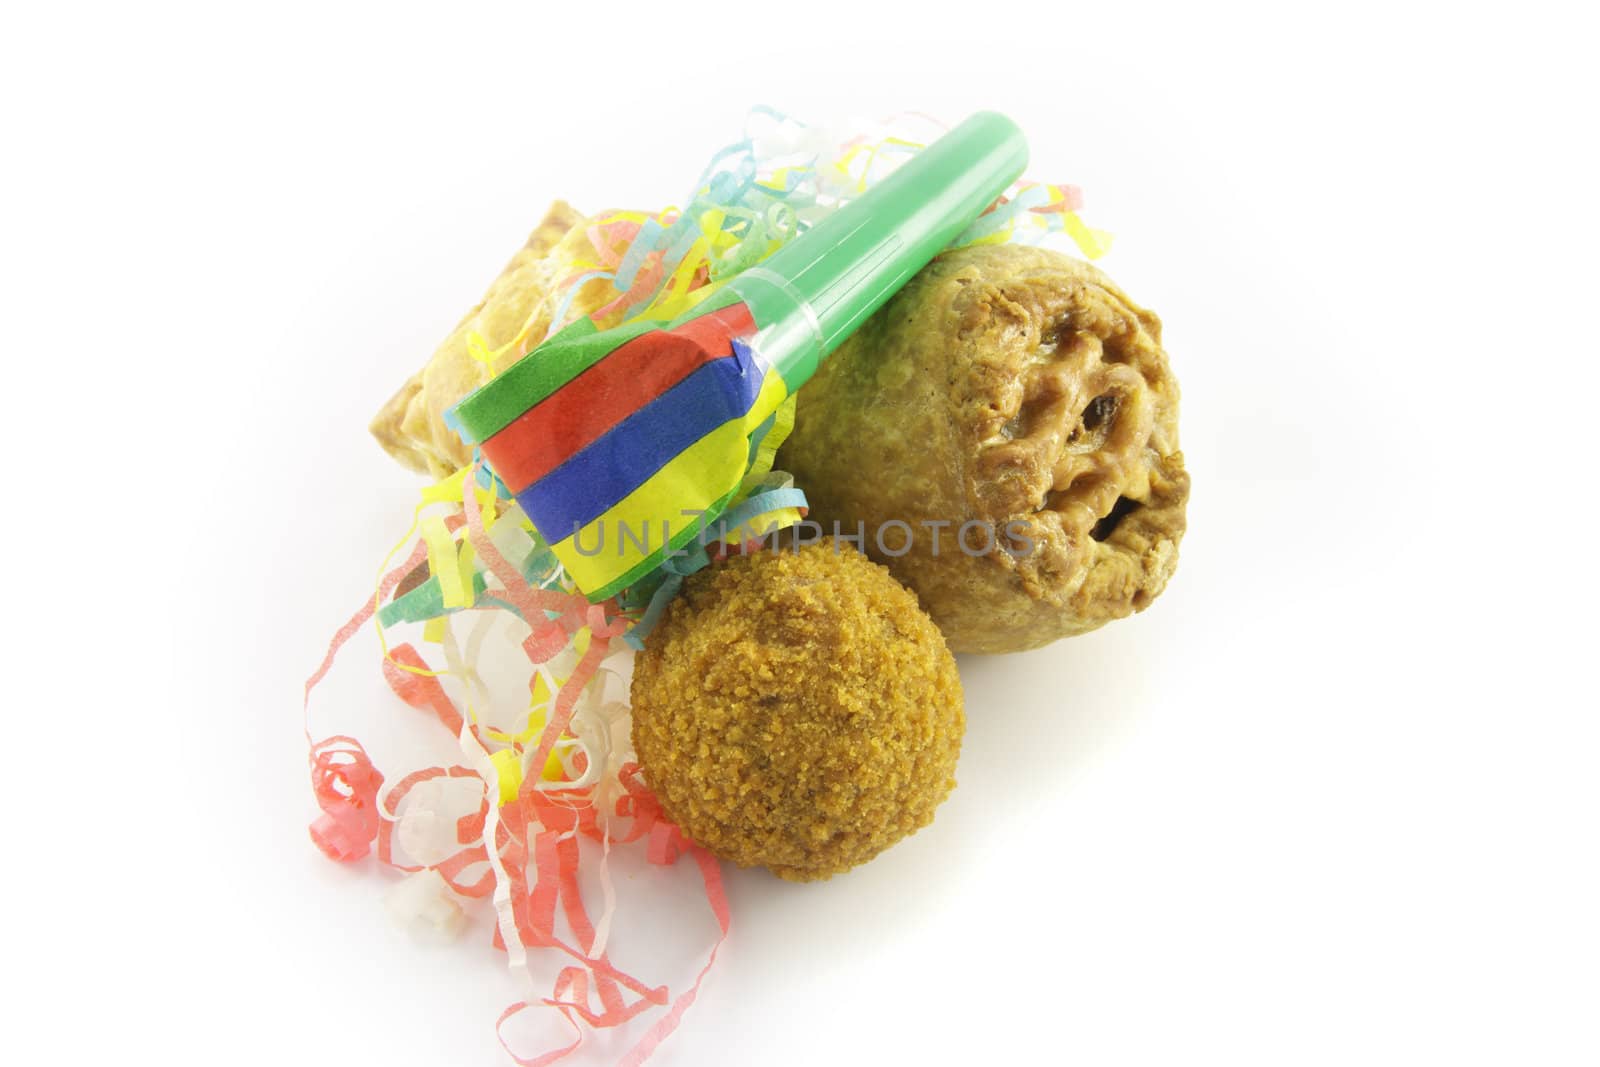 Small tasty pork pie, small round scotch egg and streamers with party blower on a reflective white background